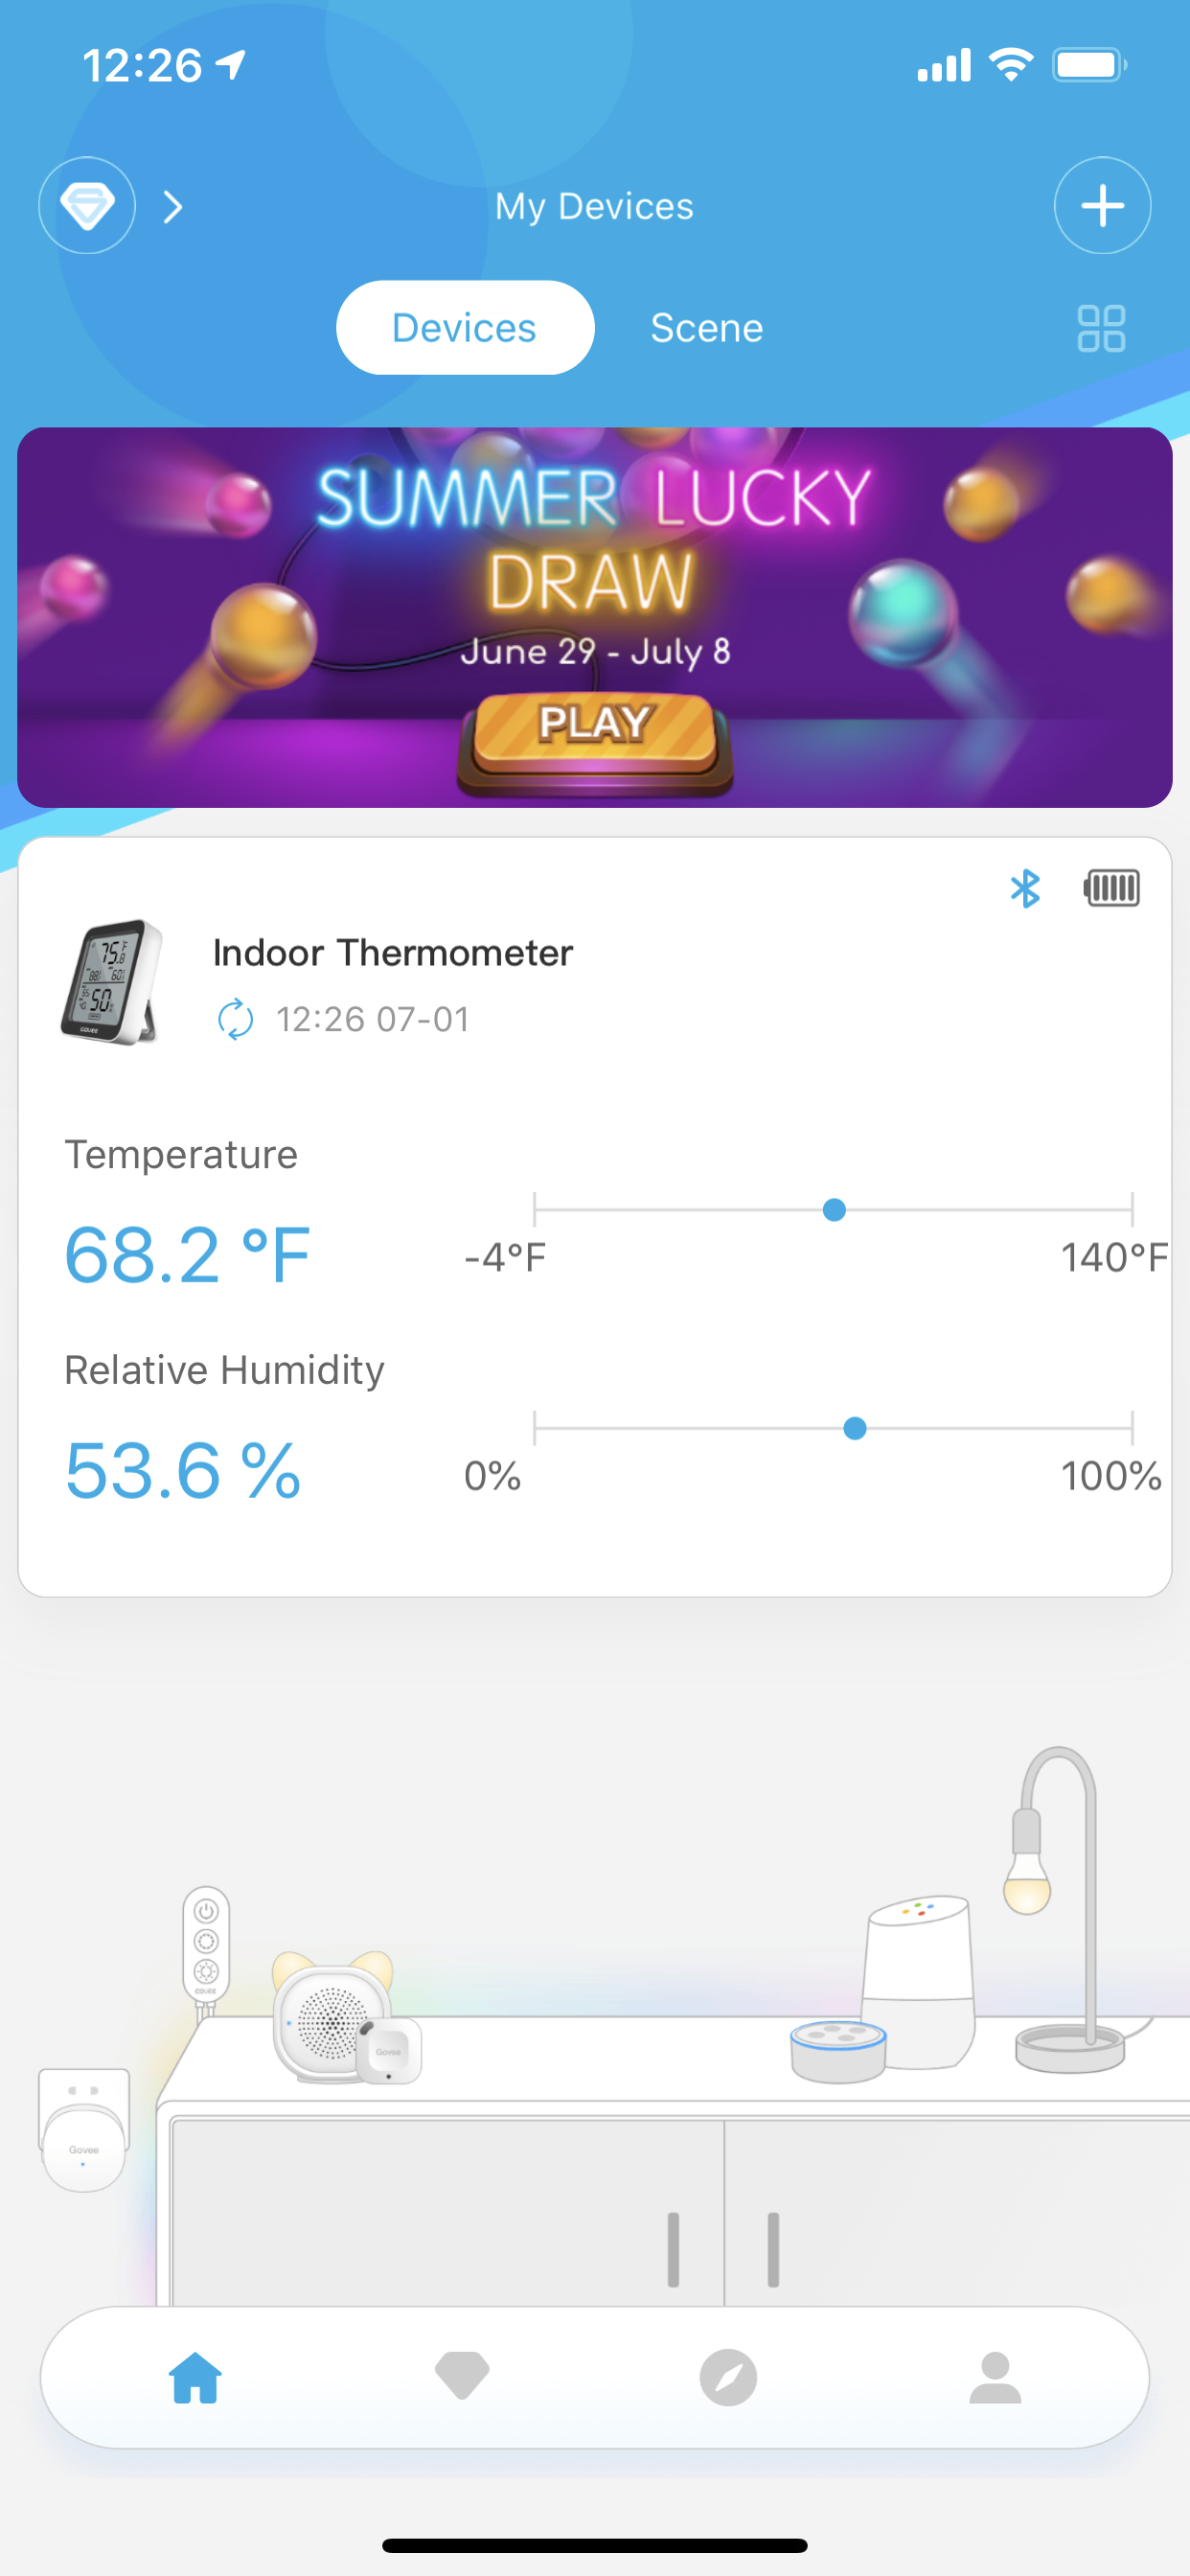 GOVEE Thermometer, Hygrometer, and Humidity Monitor - Bluetooth H5074 &  H5075 